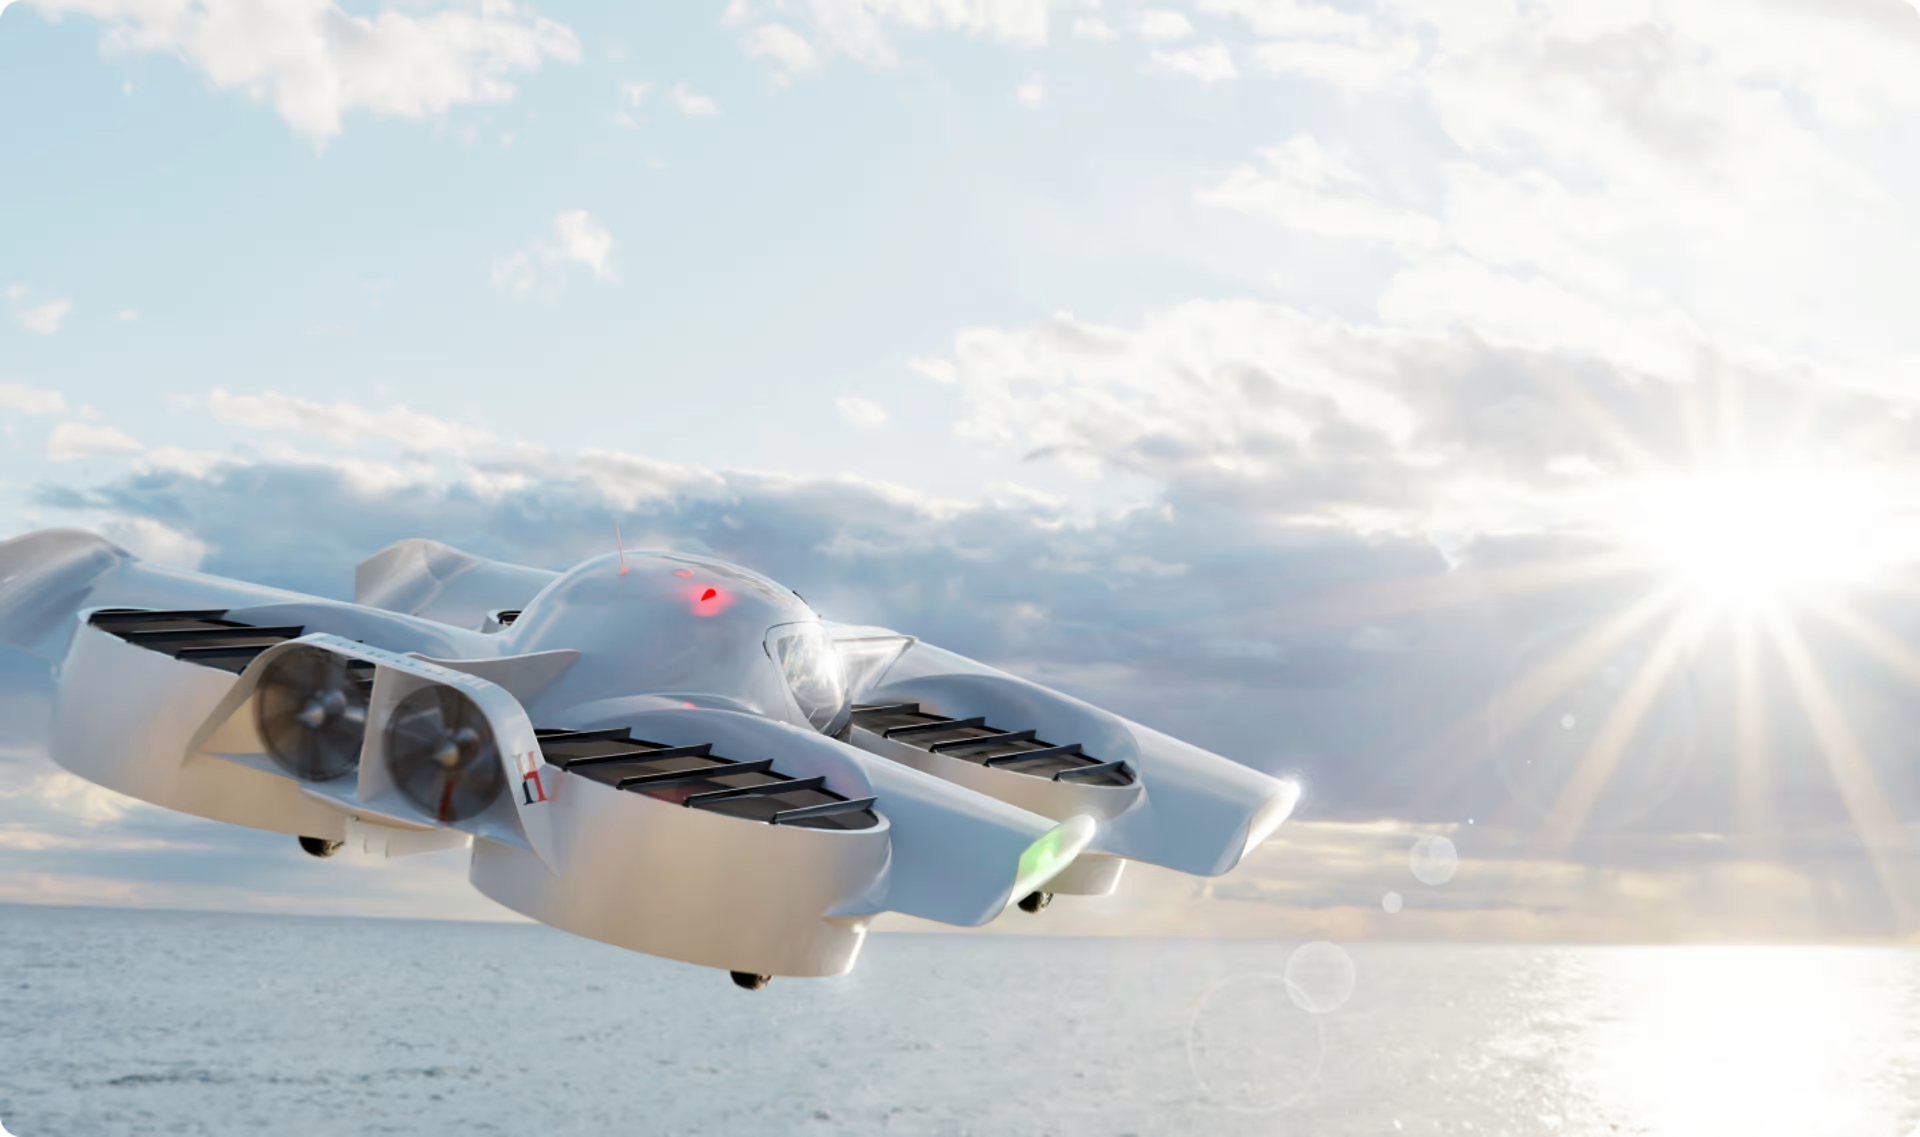 Doroni opened the door for pre-orders for an electric plane H1 cost from $ 150,000 - a two-seat aircraft with a maximum speed of 225 km / h and a range of 100 km